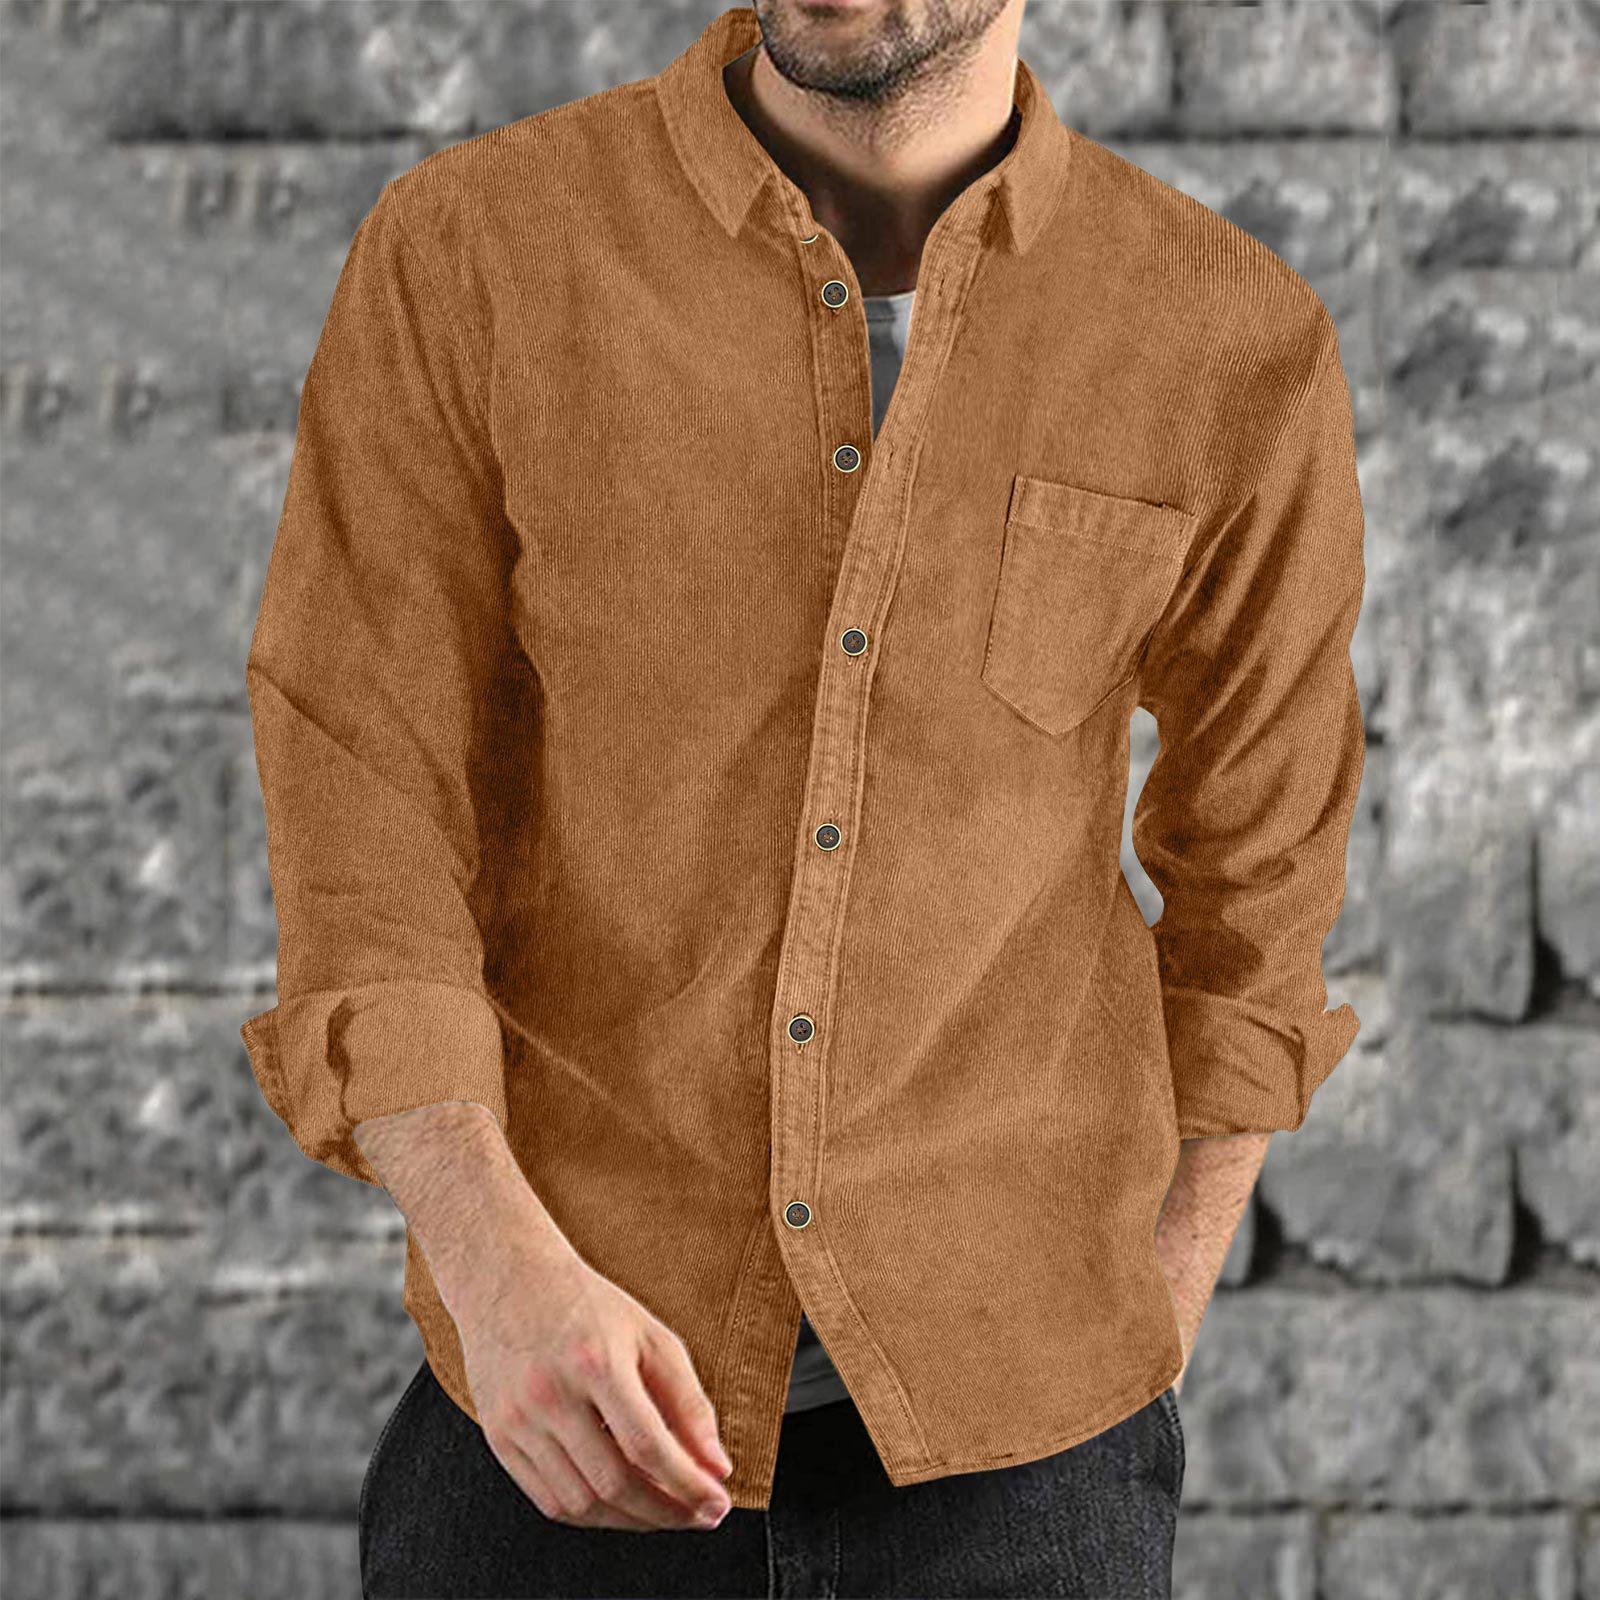 Men's Vintage Casual Long Sleeve Chic Shirts